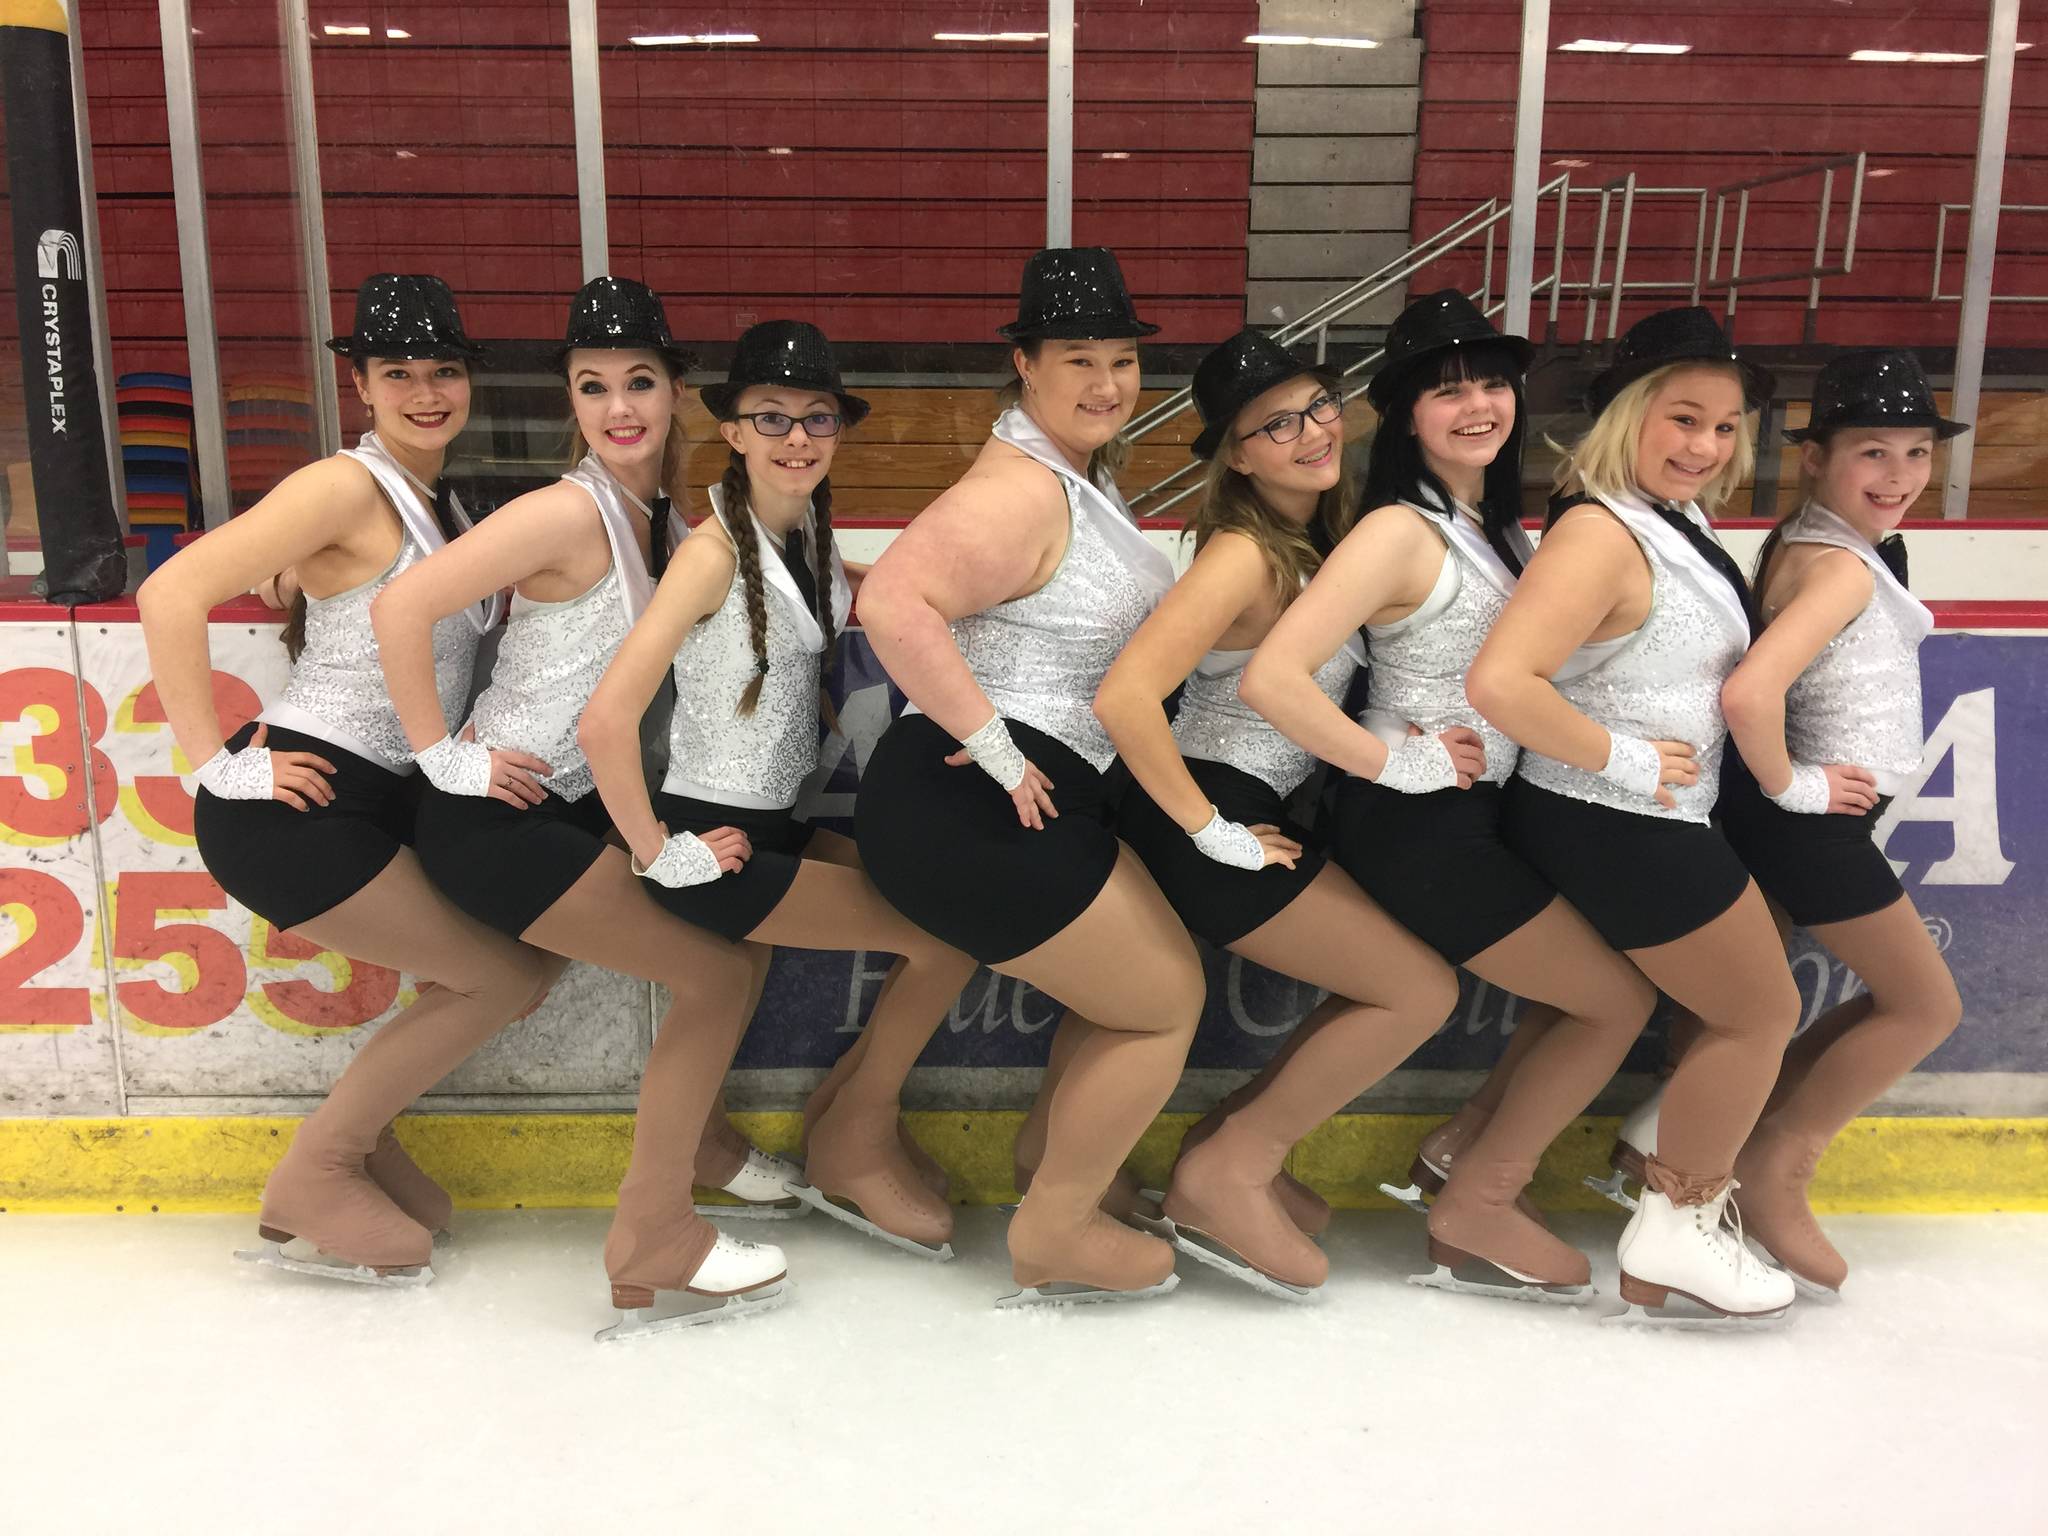 The Soldotna Regional Sports Complex figure skating team presents “Can’t Stop the Dancing,” on Sunday, April 2 at the sports complex with two performances at 1 p.m. and 4 p.m. The annual event features routines by local skaters of all ages. (Photo courtesy Madelyn McEwen)